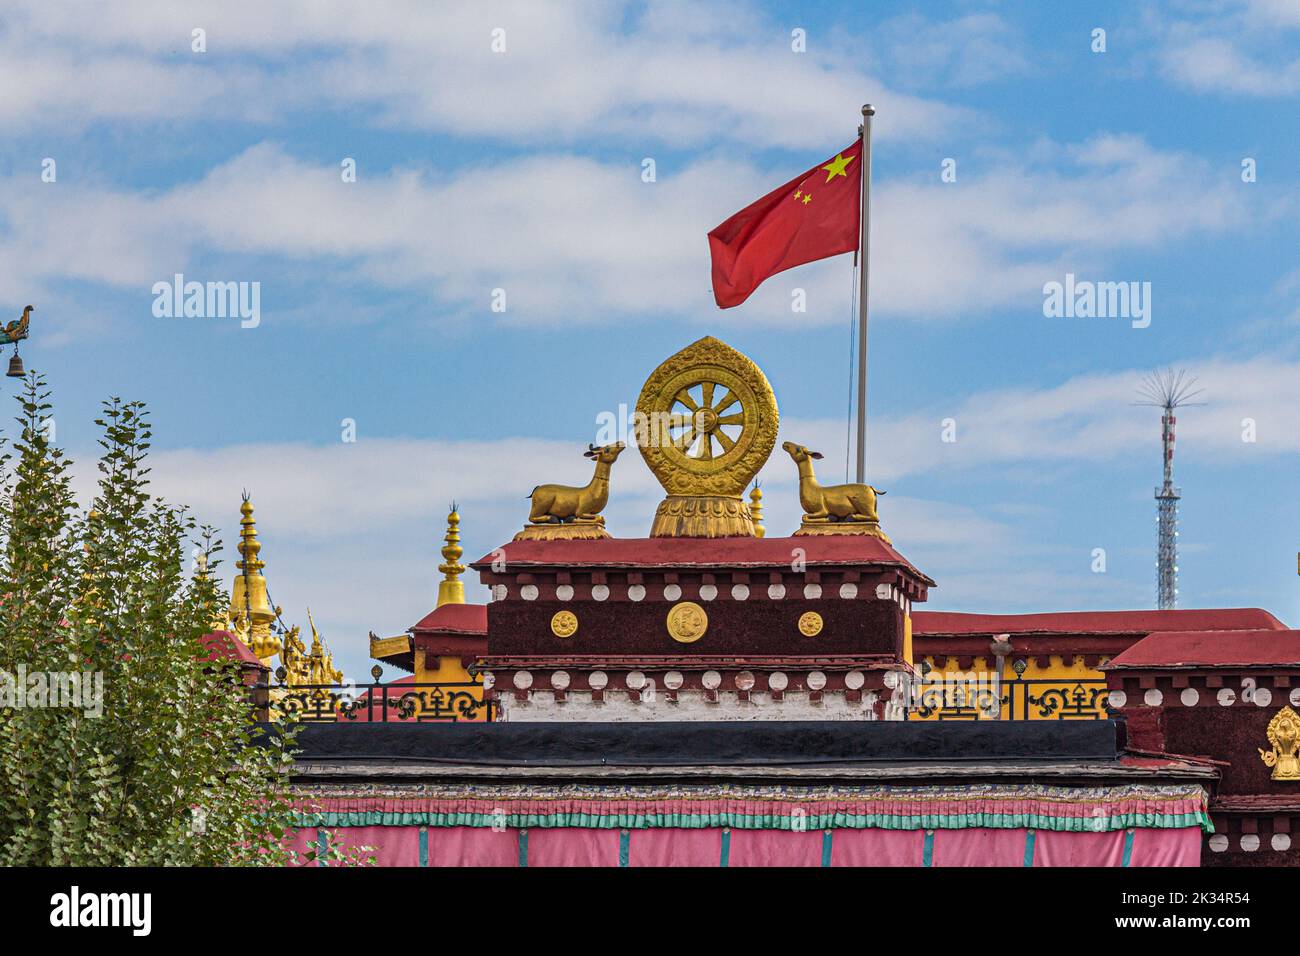 Roof of the Jokhang Temple, in Barkhor Square, Lhasa Tibet showing the scultures of two deer and the Golden Wheel of Dharma Stock Photo